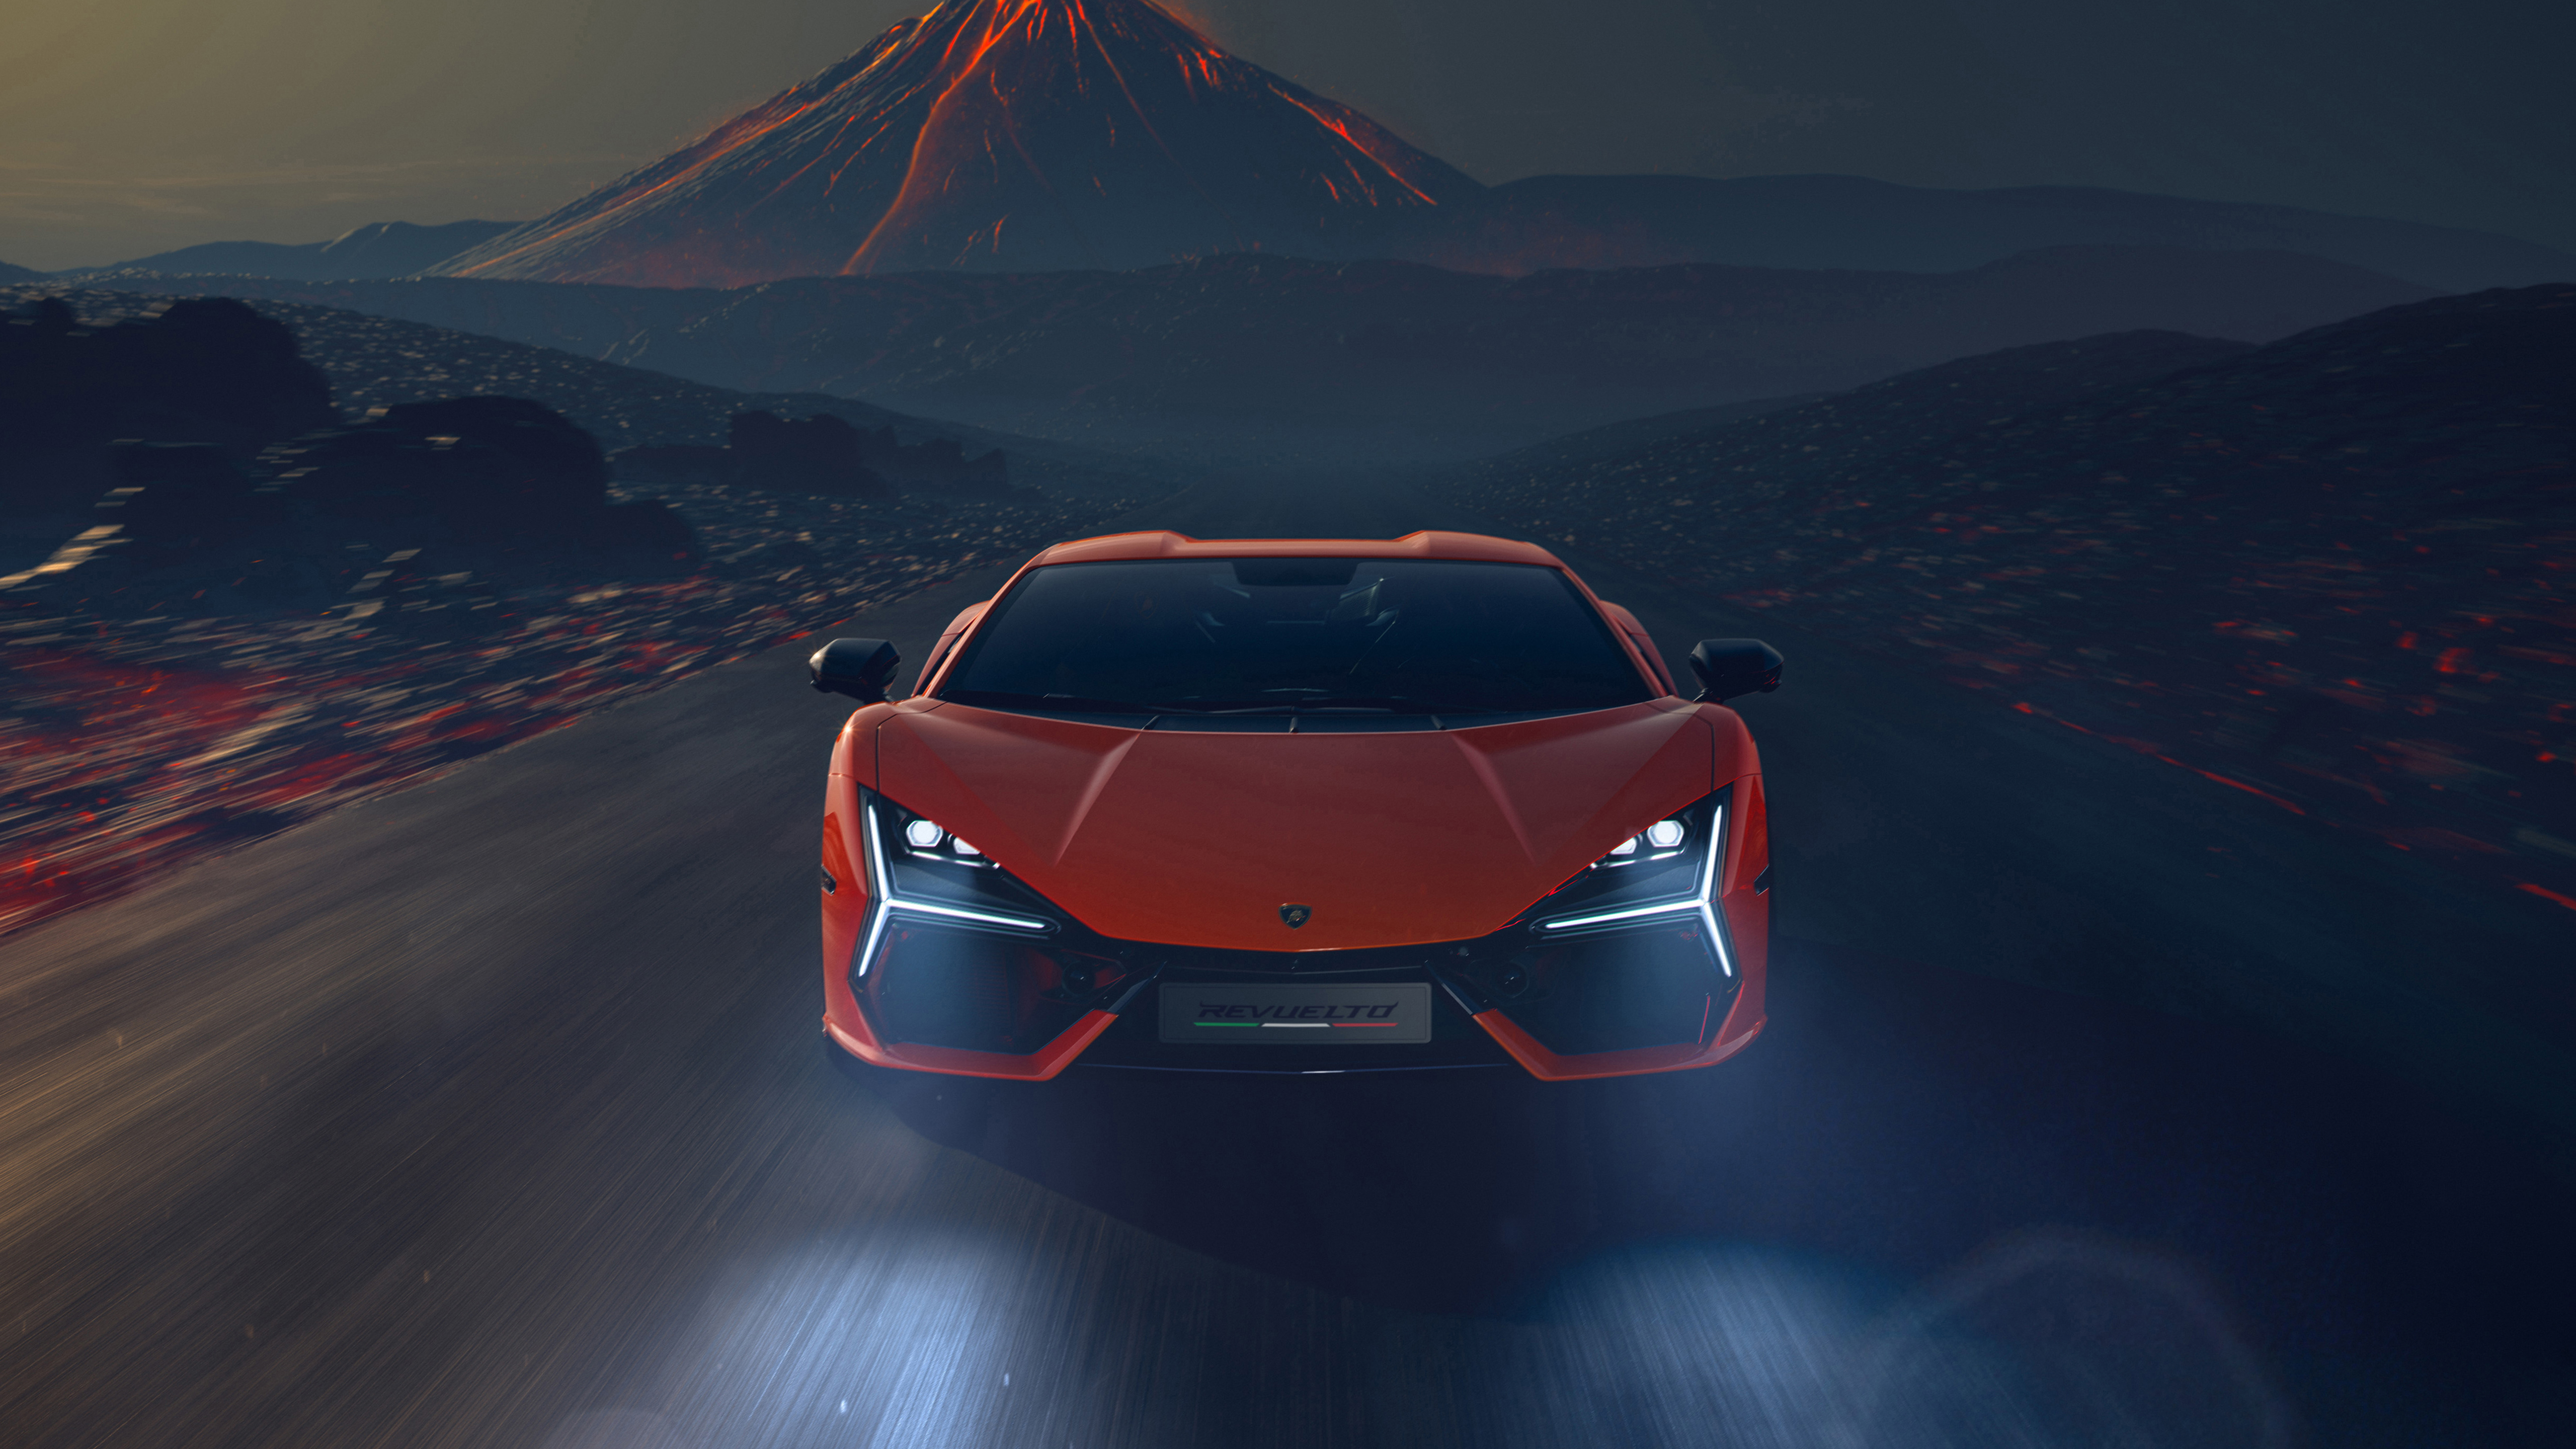 4k Cars PC Wallpapers - Wallpaper Cave